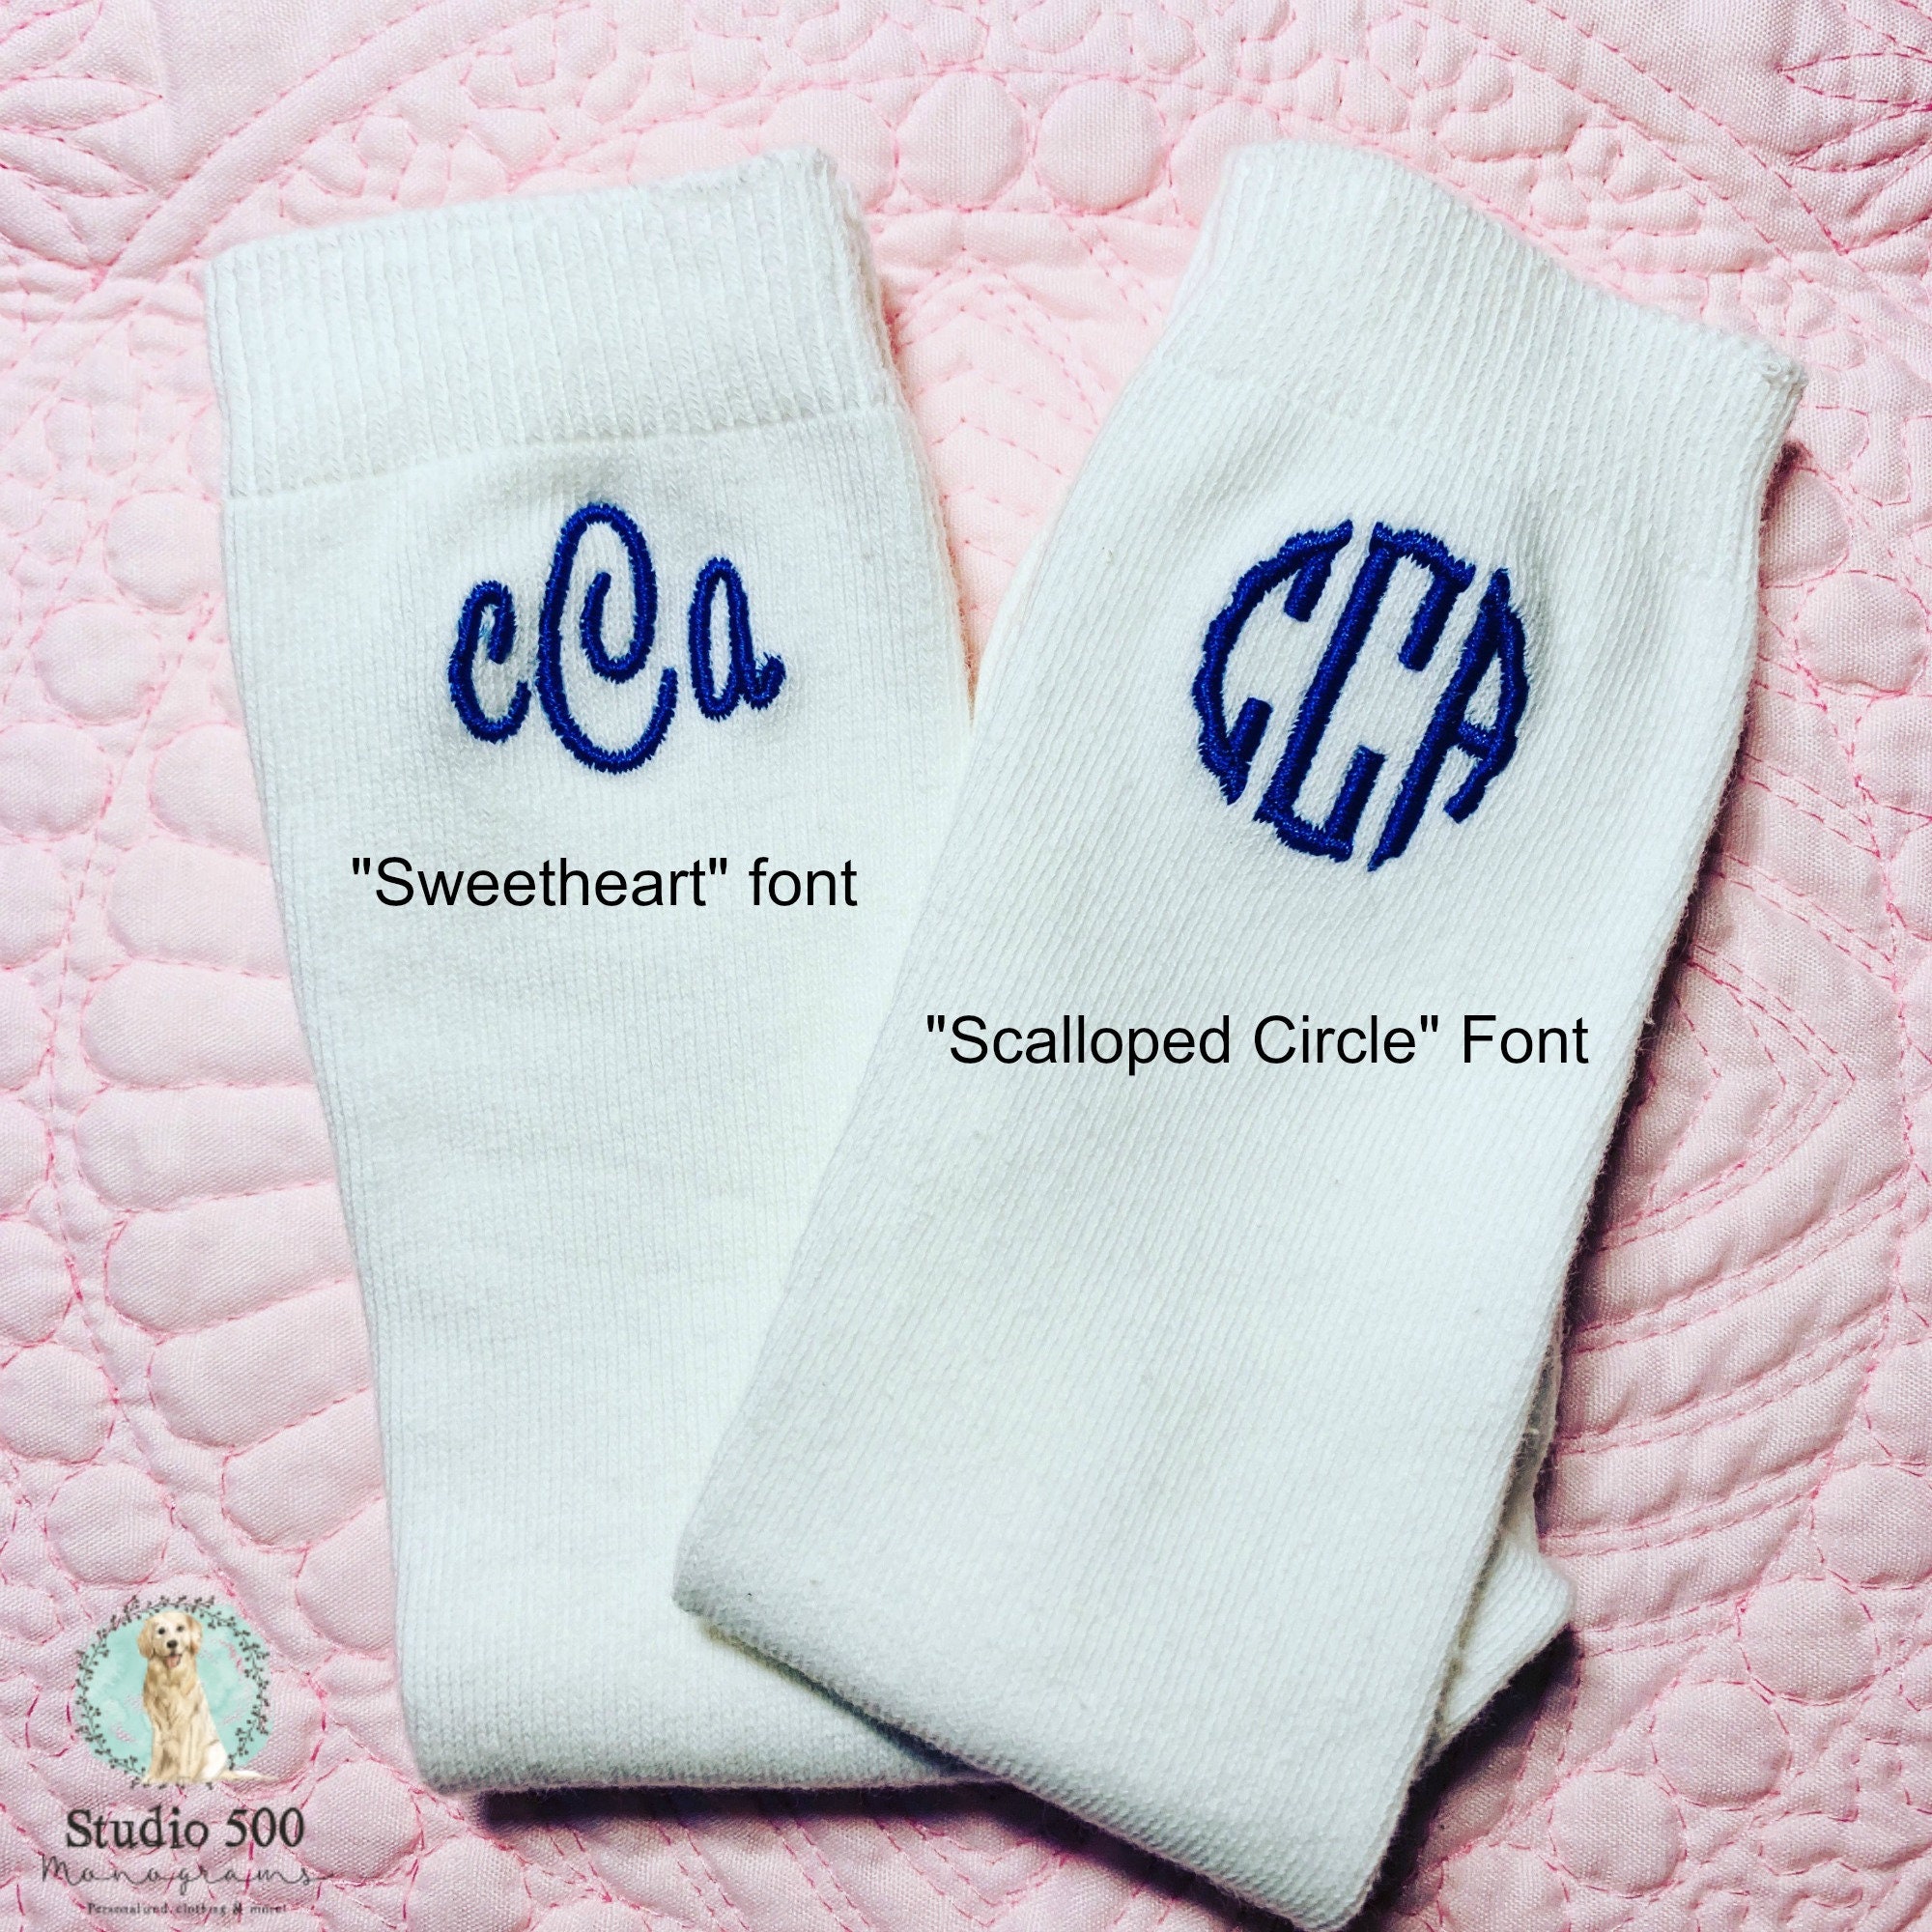 Socks/White Cotton Blend Unisex Monogrammed/Embroidered Knee High Socks/Holiday/Birthday/Weddings/Special Occasion Socks